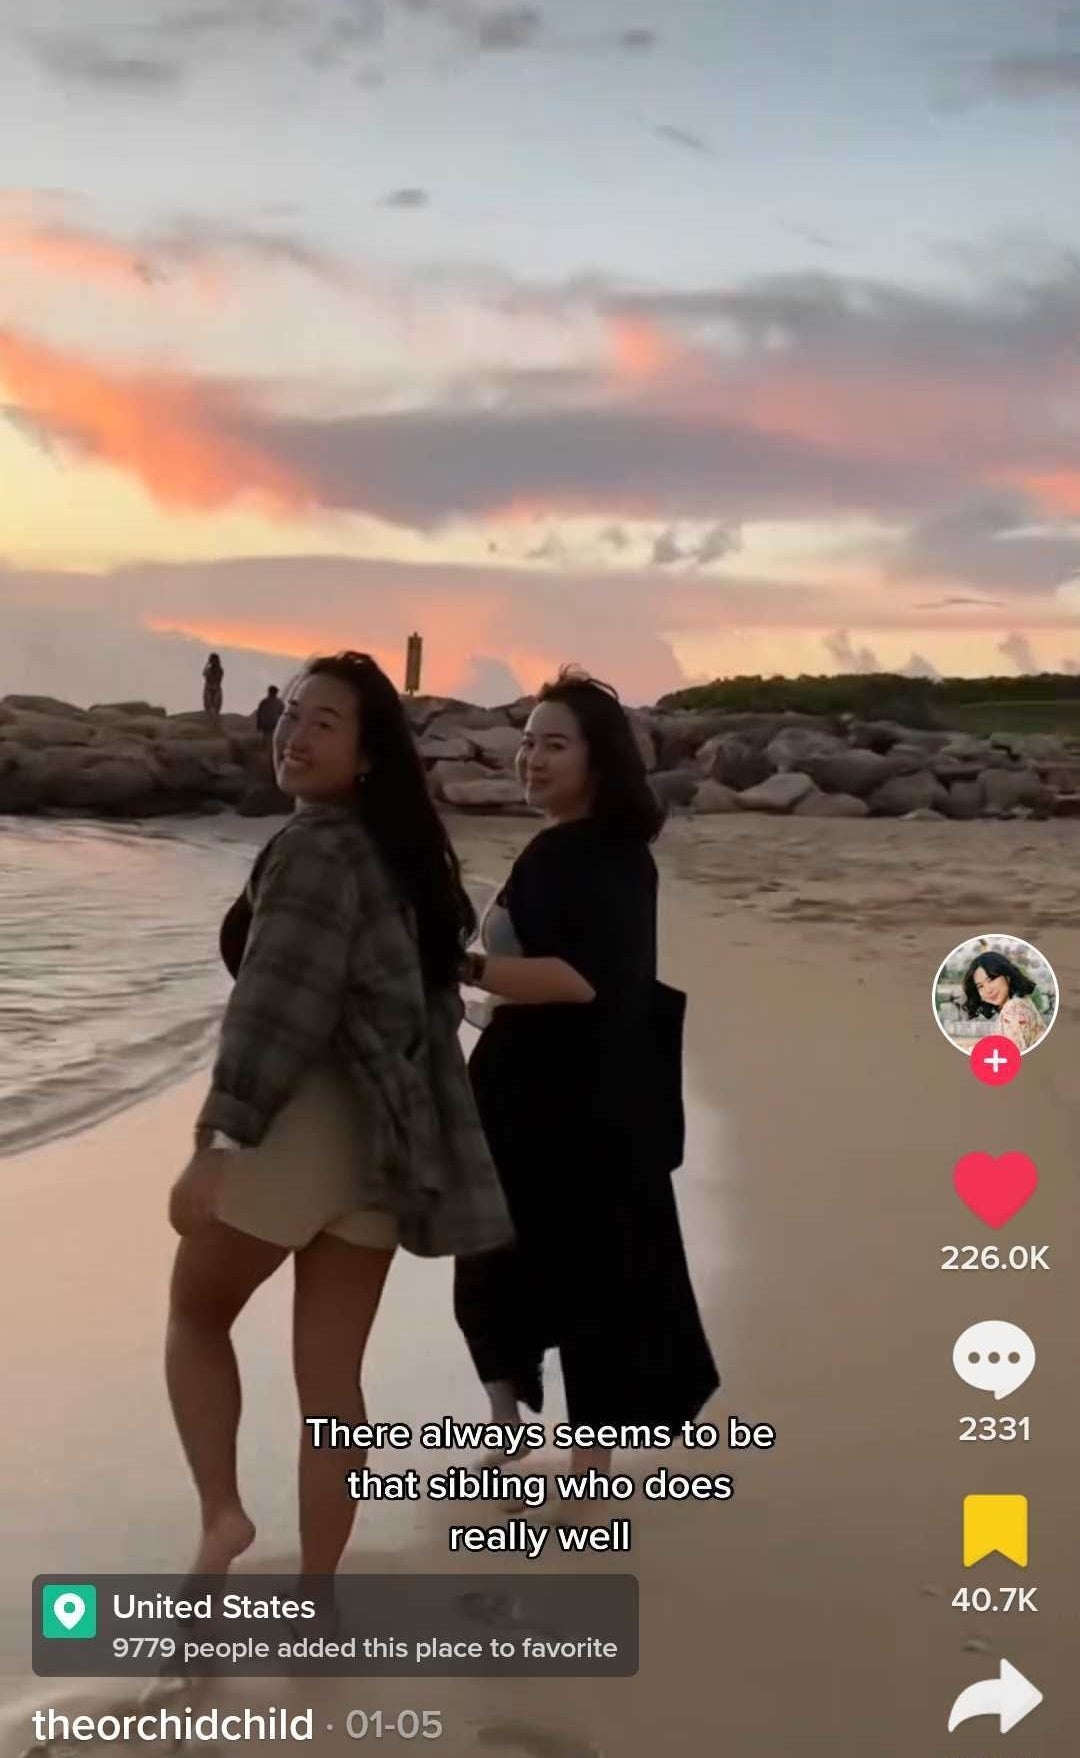 Judy and her sister walking on the beach